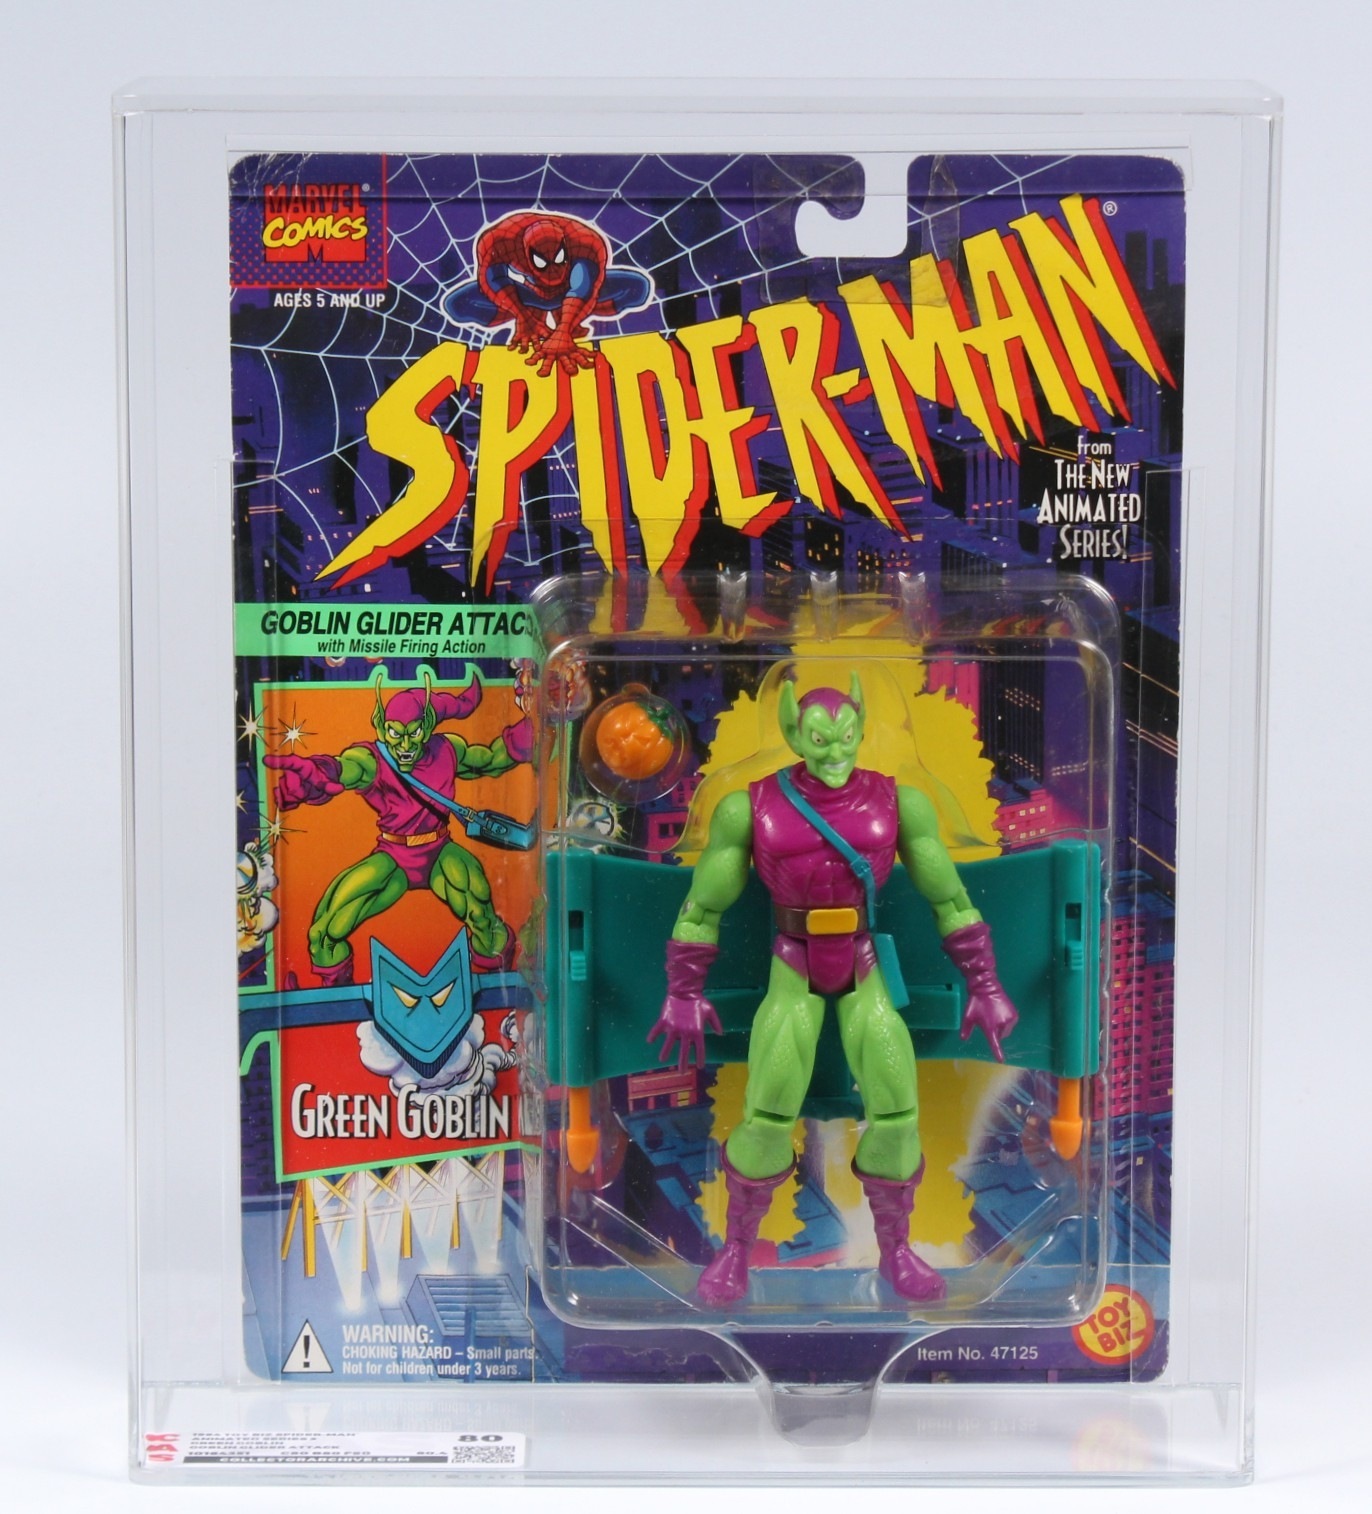 1994 Toy Biz Spider-Man Animated Series Carded Action Figure - Green Goblin